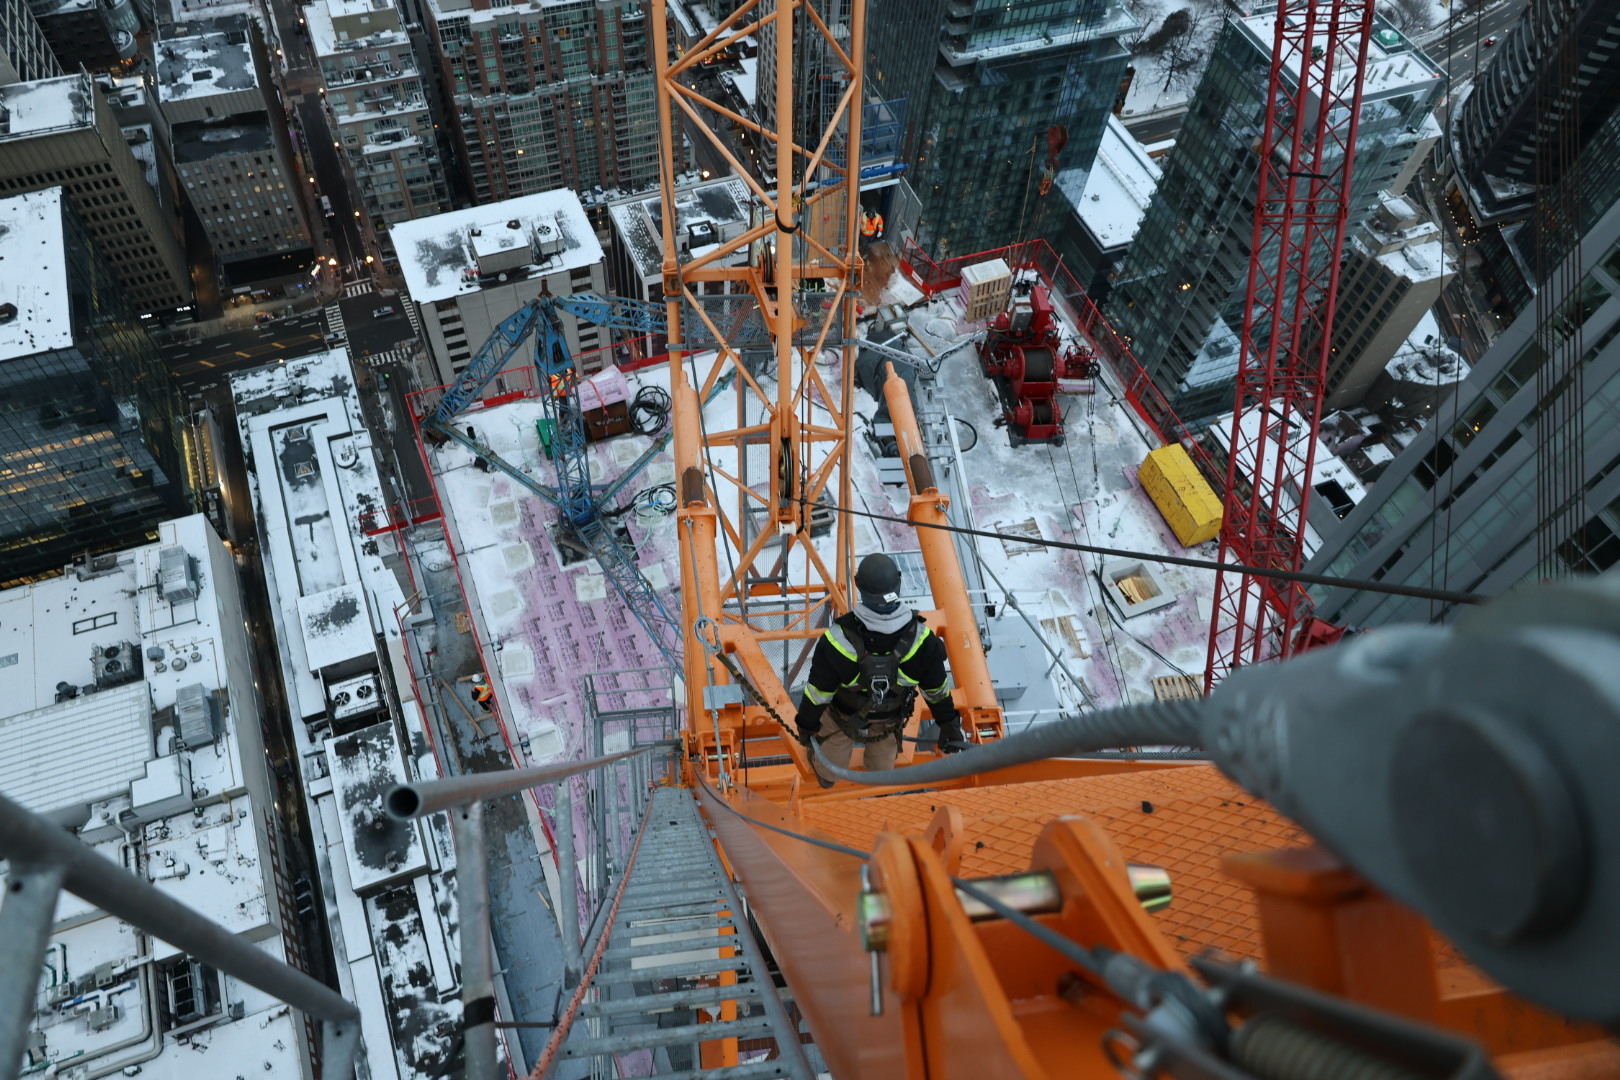 Steep shot of the height of the crane and a member climbing down the stairs